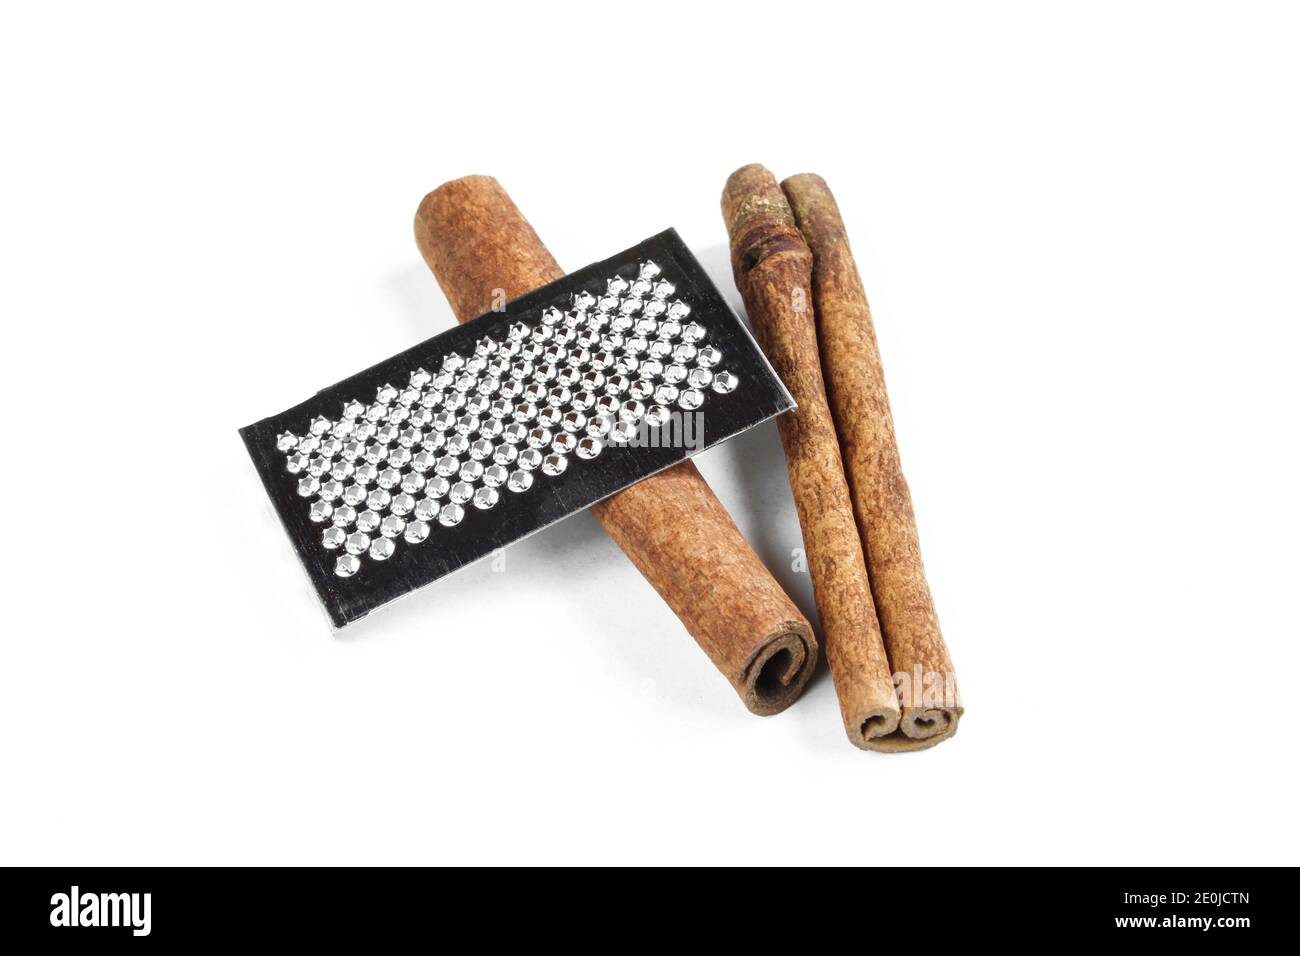 Two brown cinnamon sticks along with metallic grater isolated on white background Stock Photo